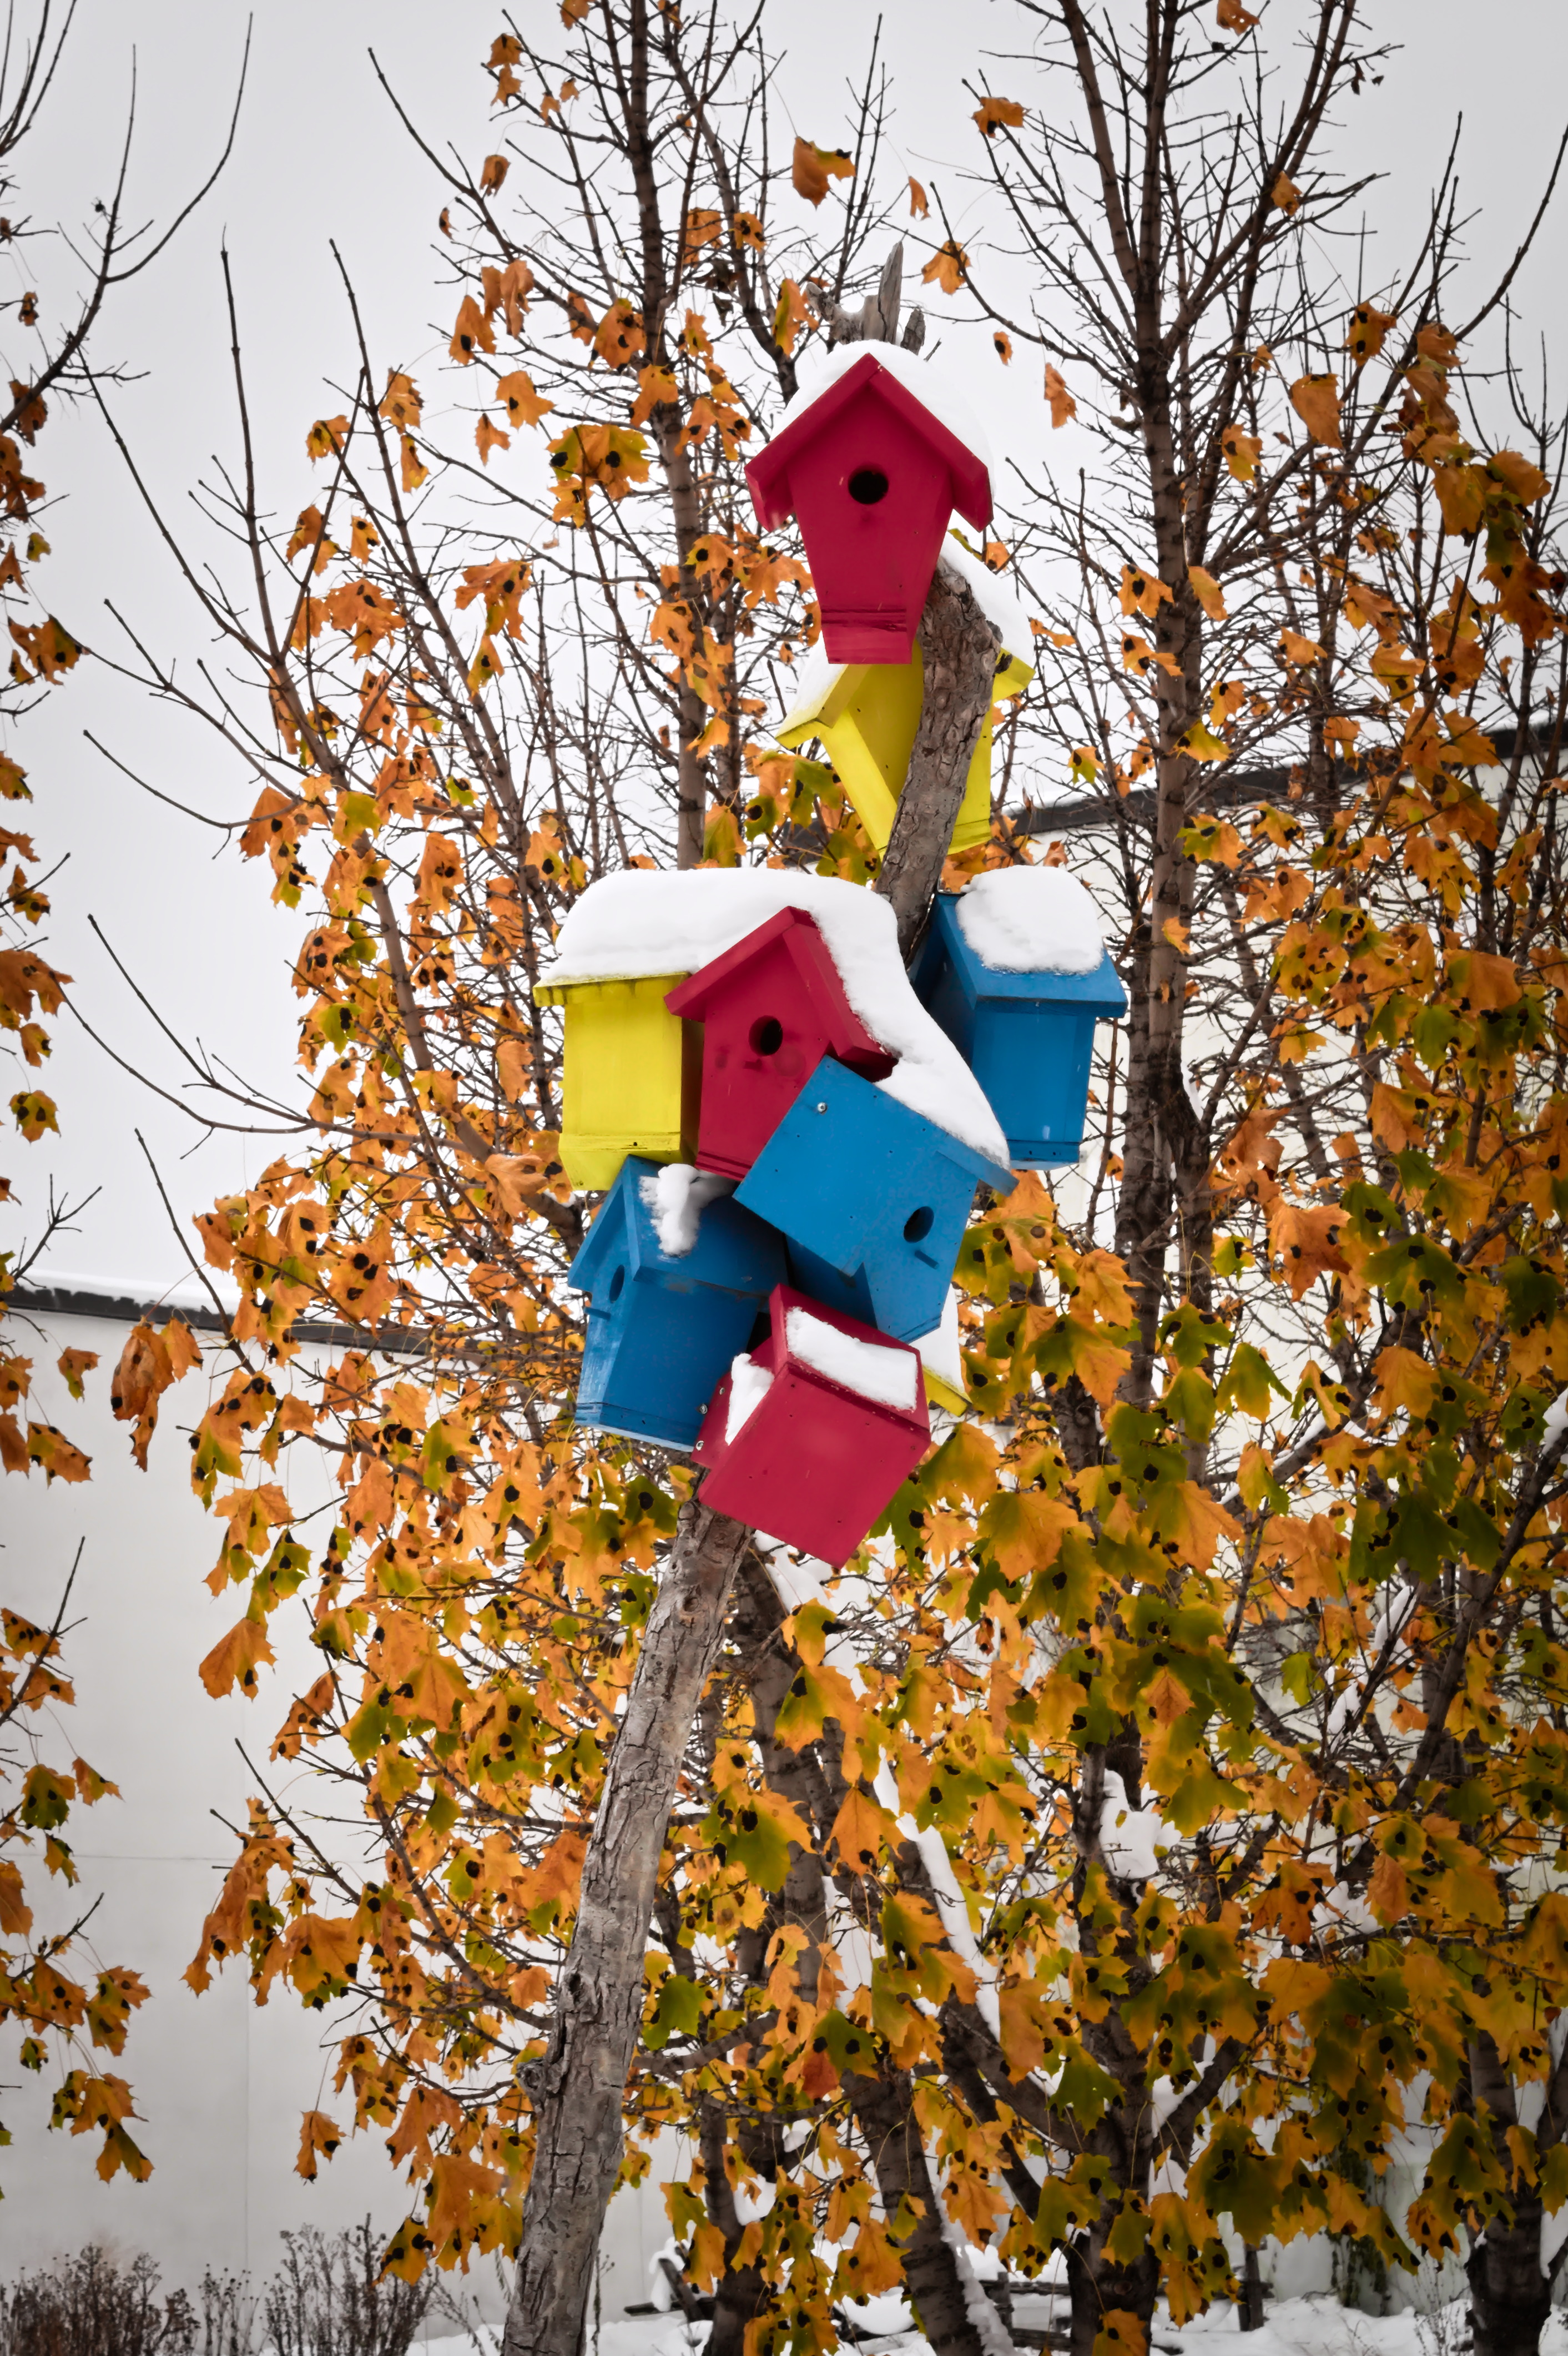 Small colourful bird houses (red, blue, and yellow) clustered on a wooden pull, behind them are orange-leafed trees and a nondescript snowy background